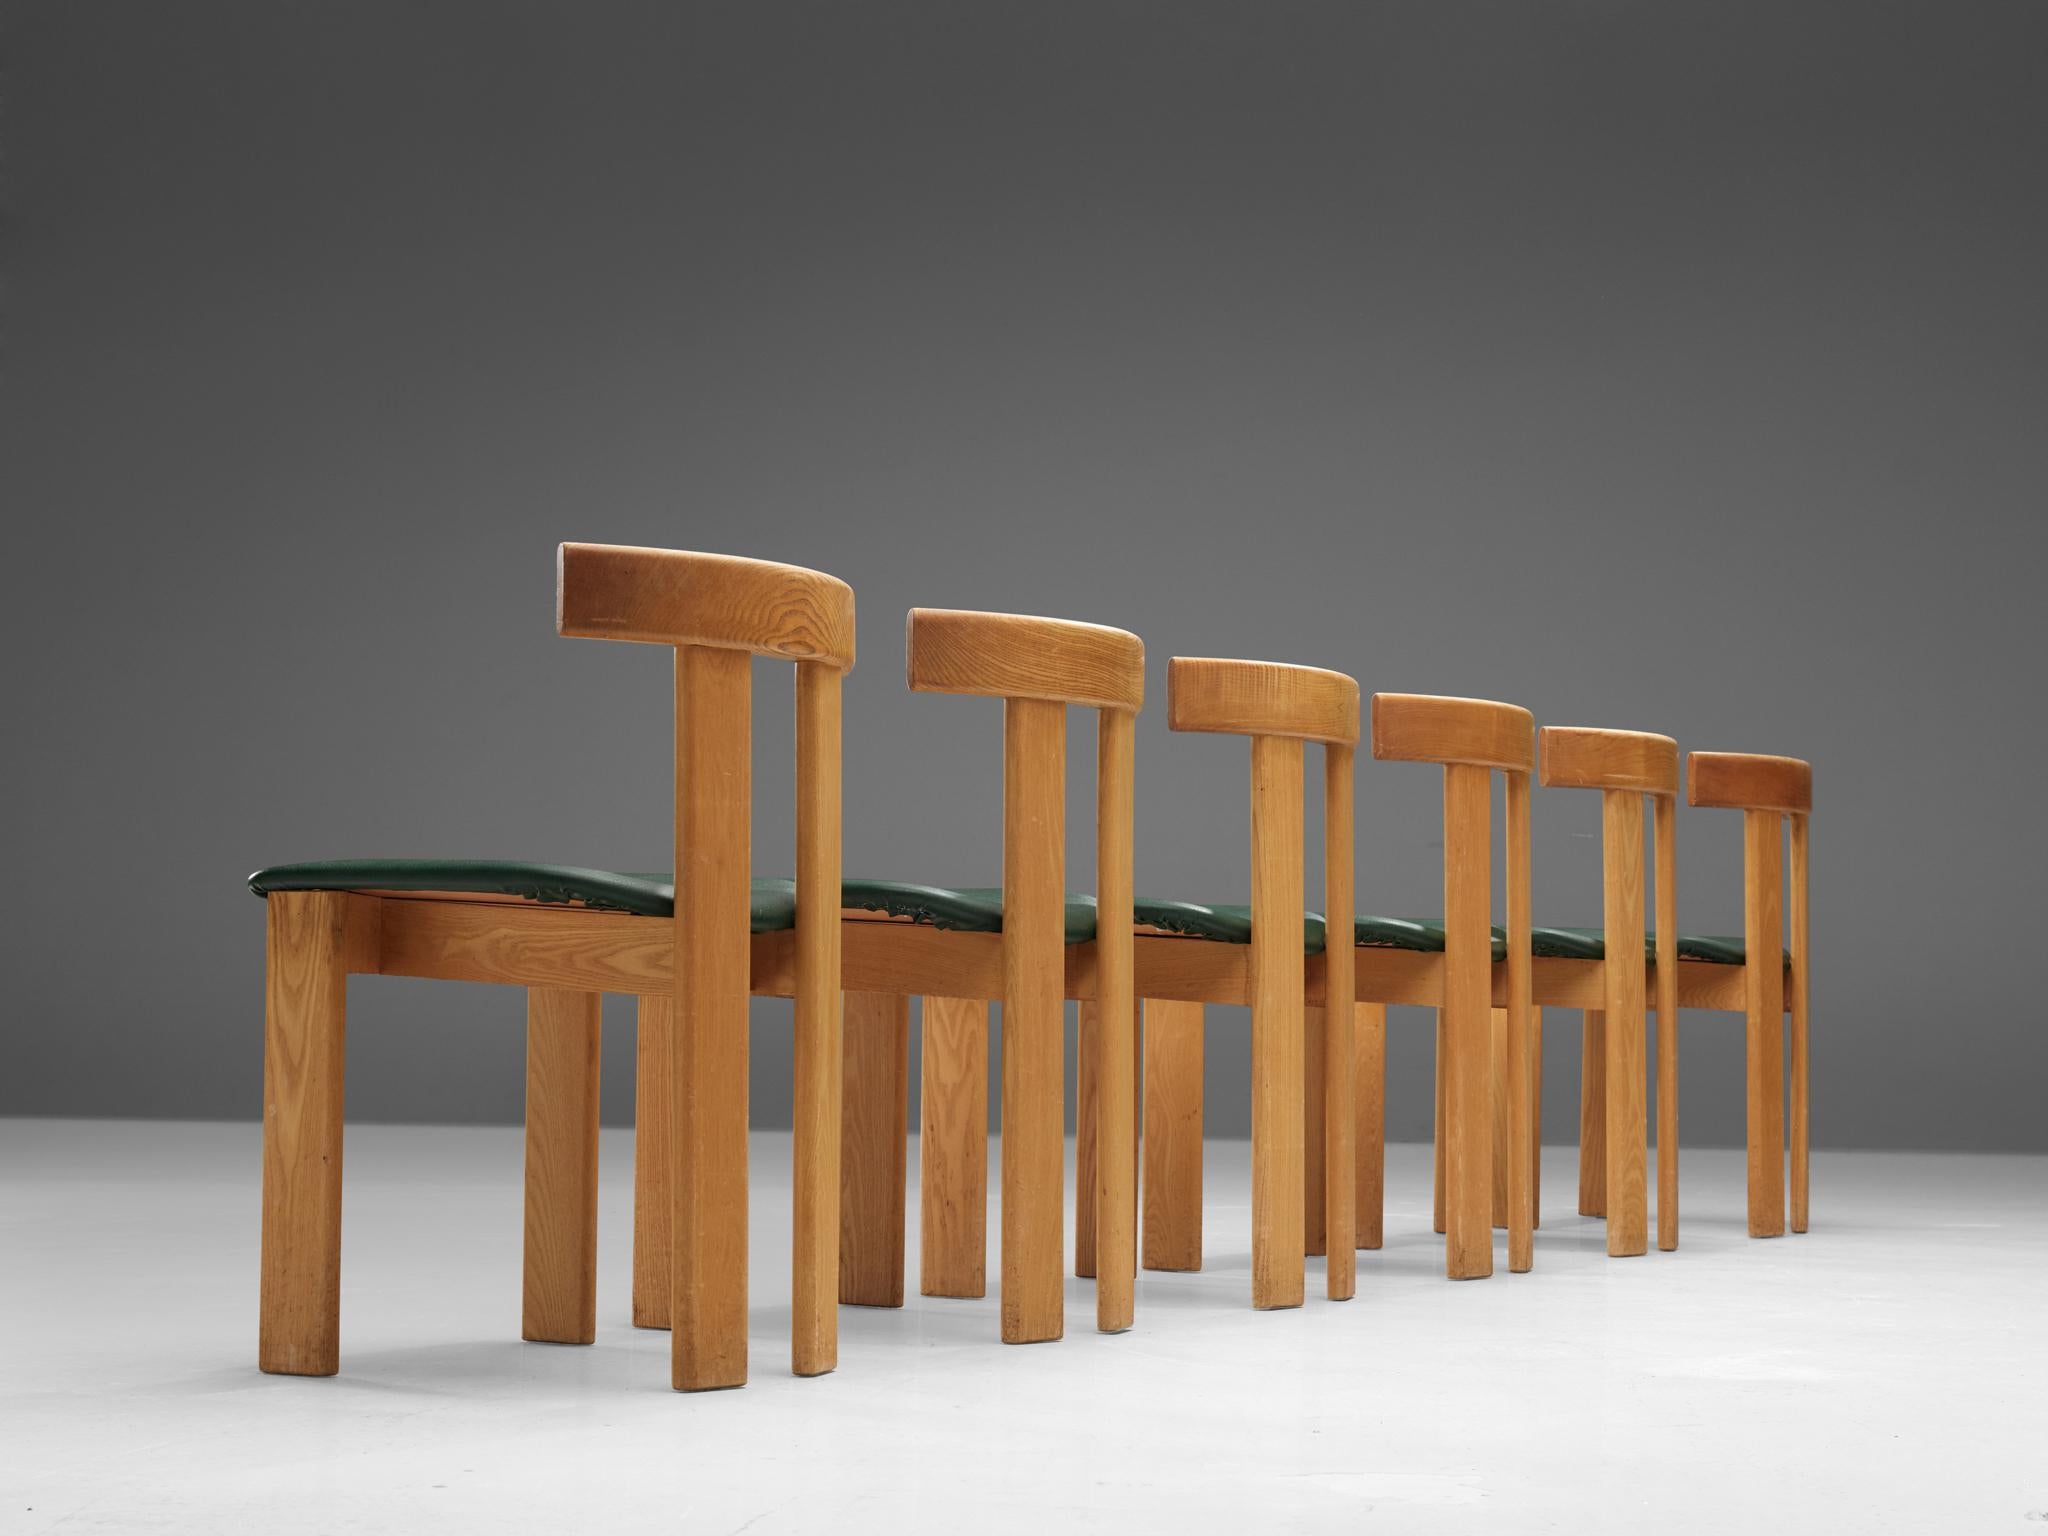 Dining chairs, ash and leatherette, France, 1960s.

Set of six sculptural chairs that feature wonderful backrests, consisting of two vertical slats distanced from each other. The slats are connected at the top with a curved slat, which gives this